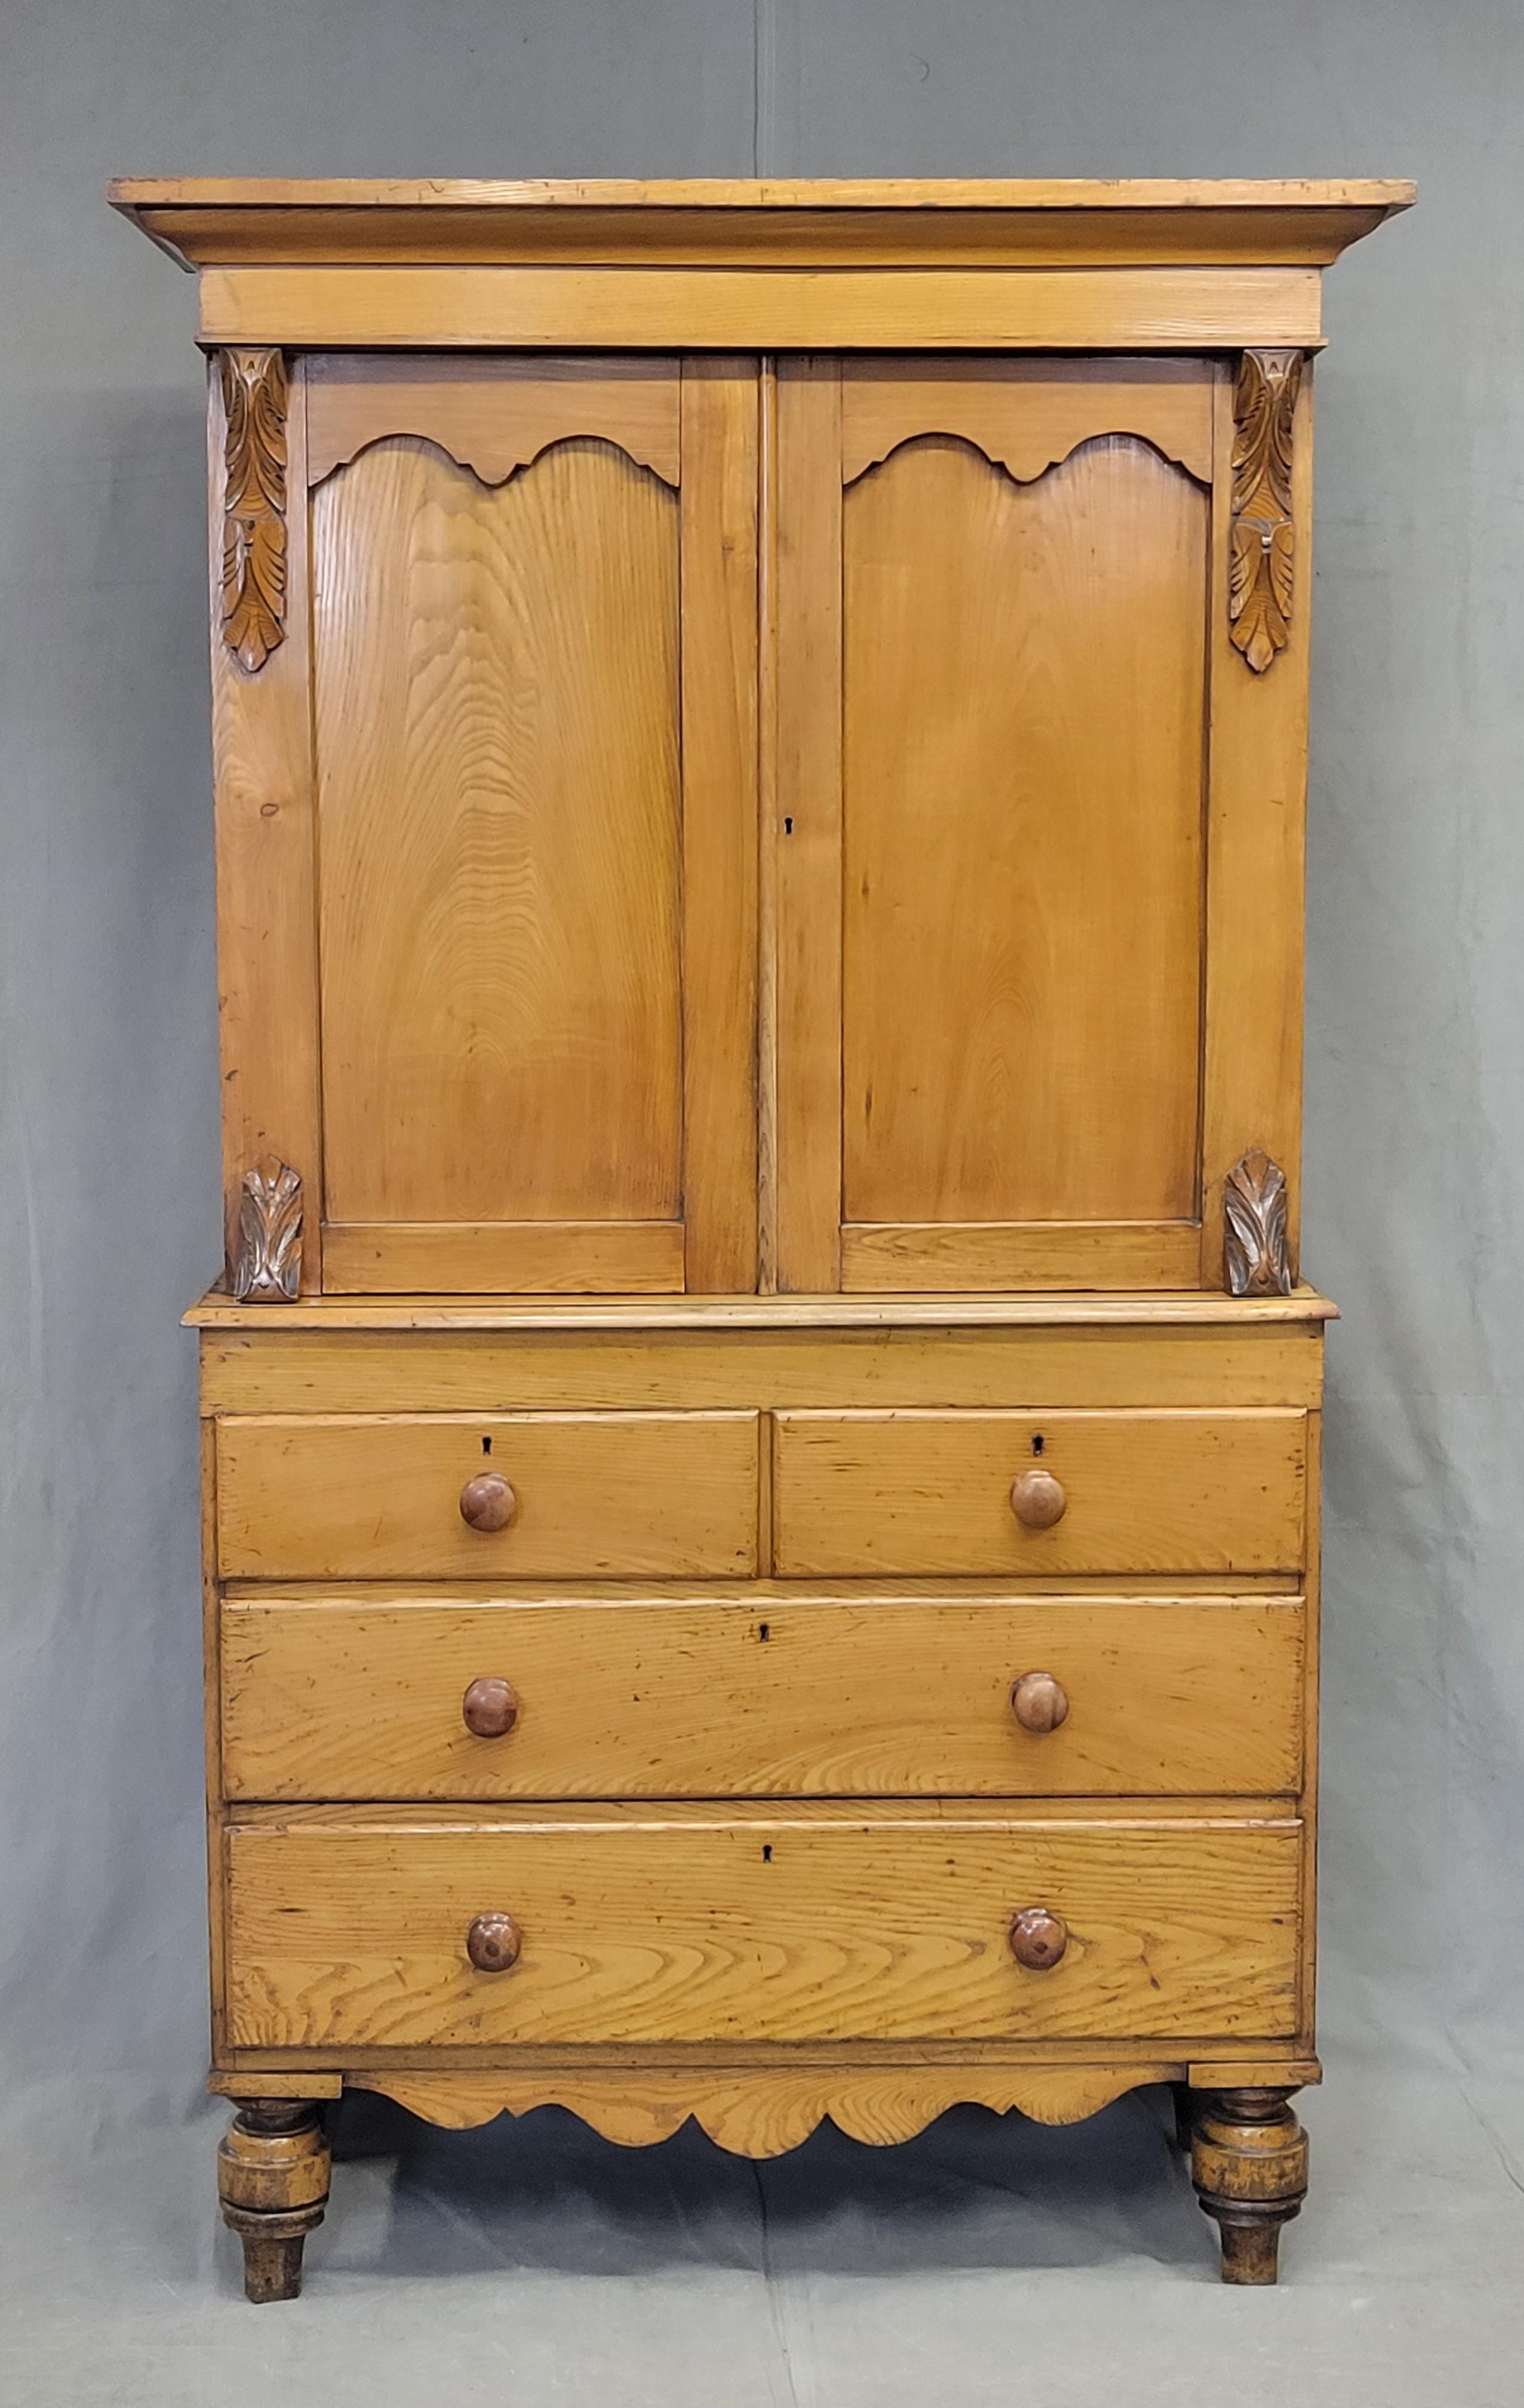 Antique 19th Century golden pine and elm linen press from Northern England or perhaps Scotland. The wood on this piece has a golden glowing patina and is expertly crafted out of elm panels on the front and pine on the side. Carved wood corbels on